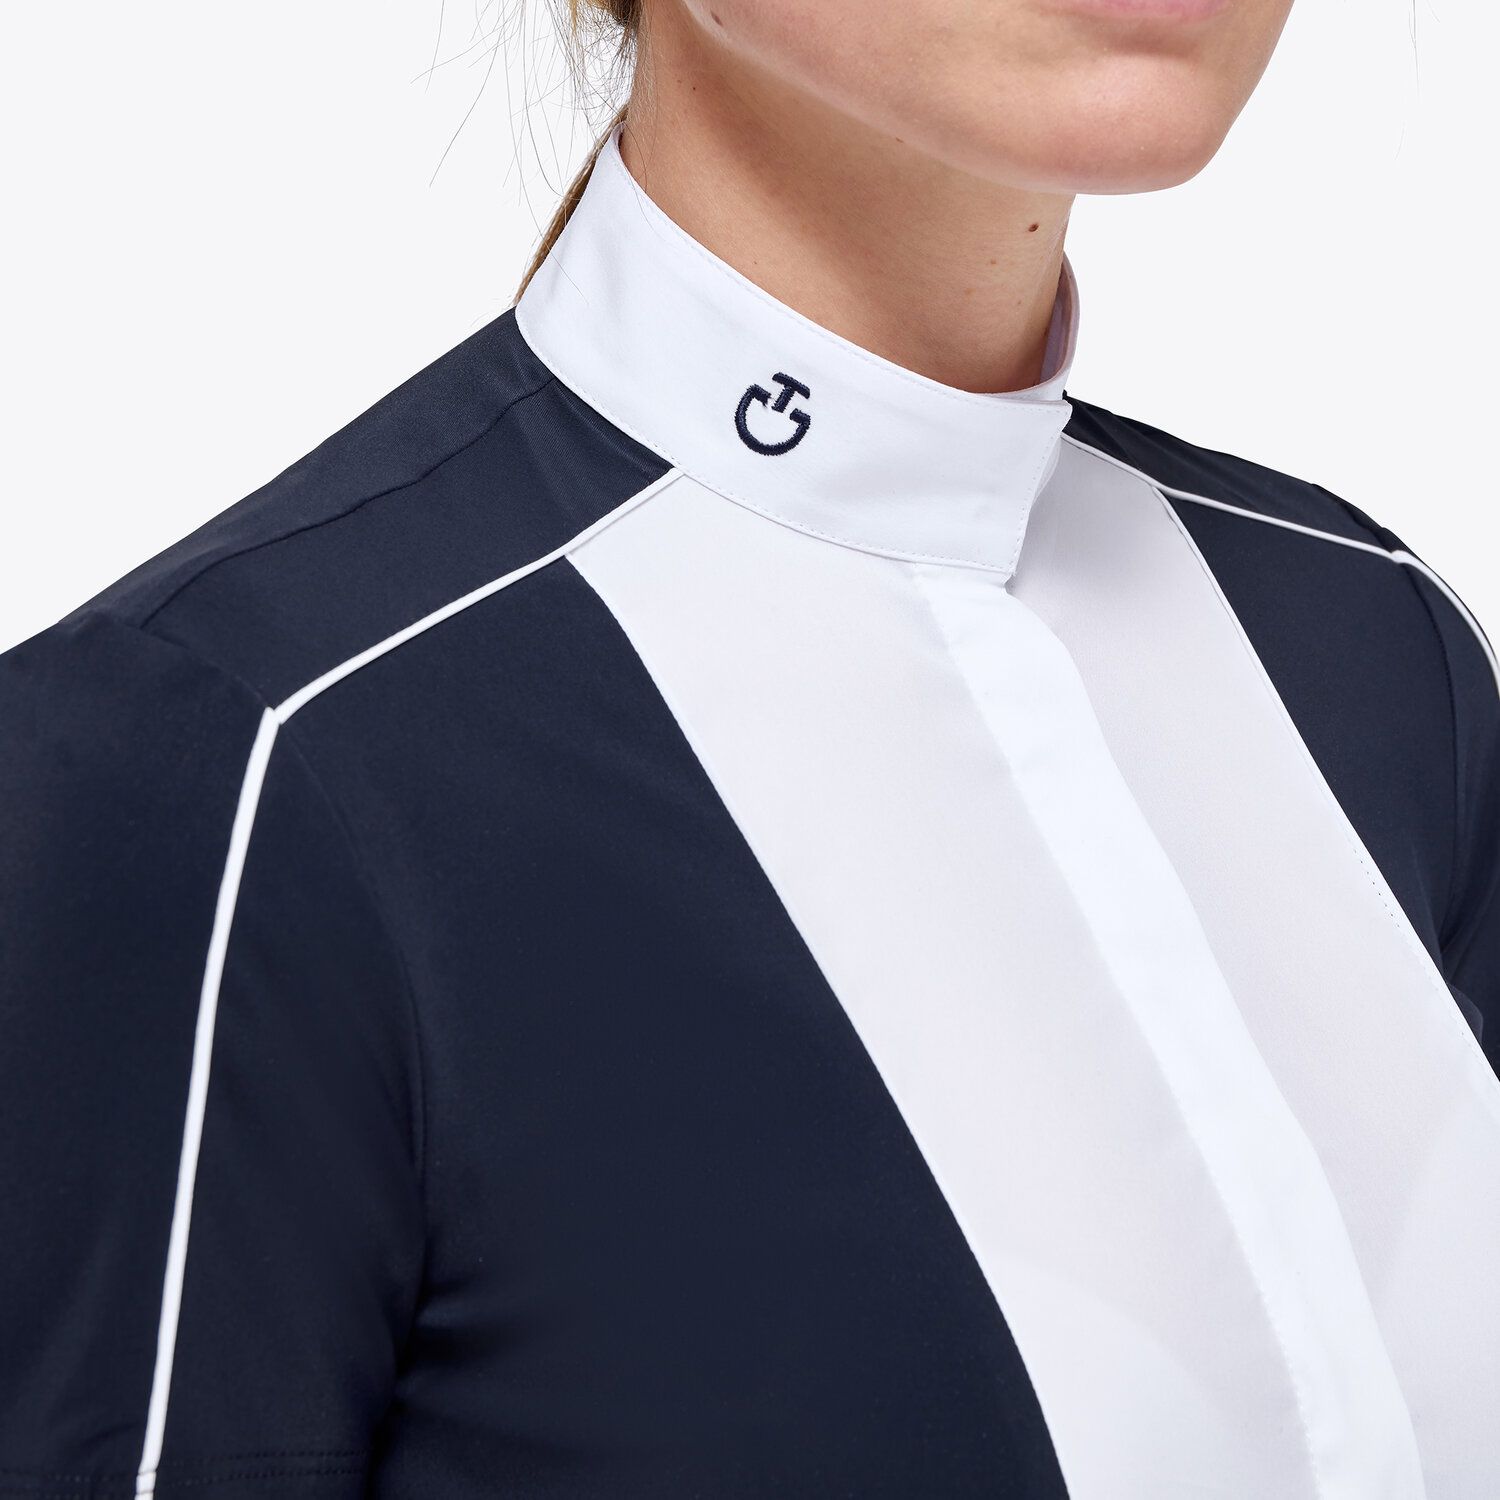 Cavalleria Toscana Women's competition shirt with bib NAVY-4